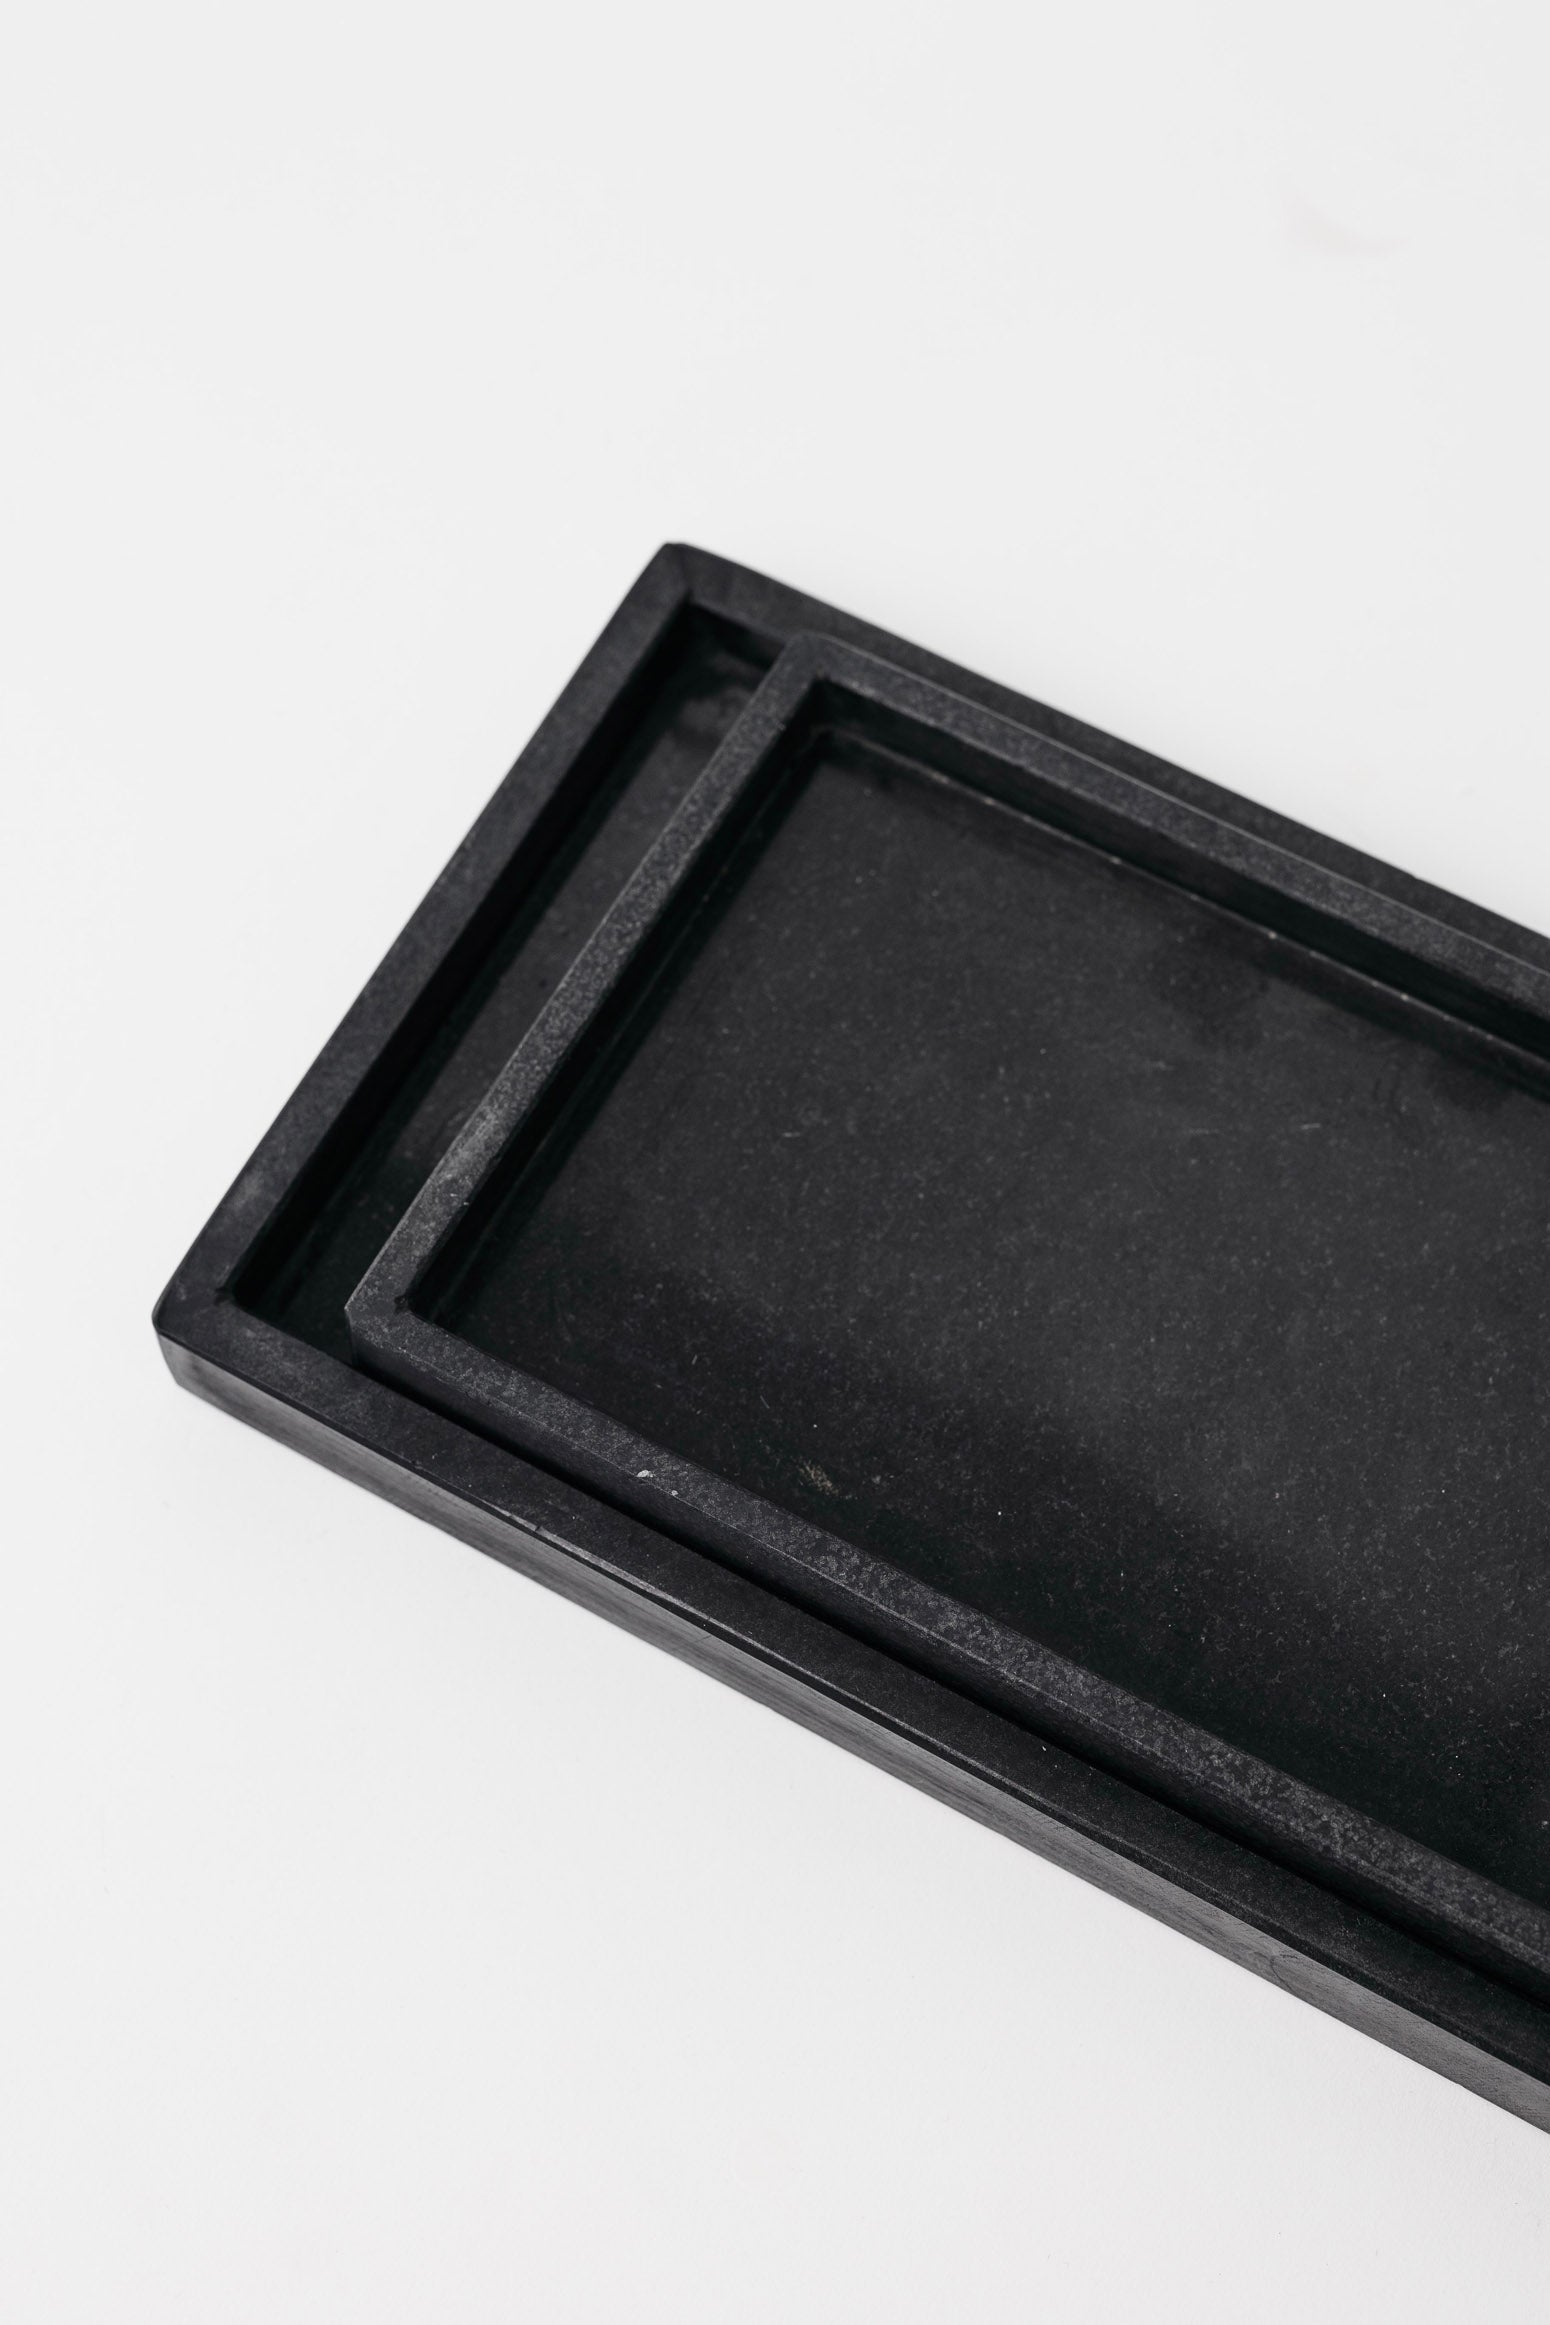 Terese Black Marble Rectangle Tray - 2 Sizes